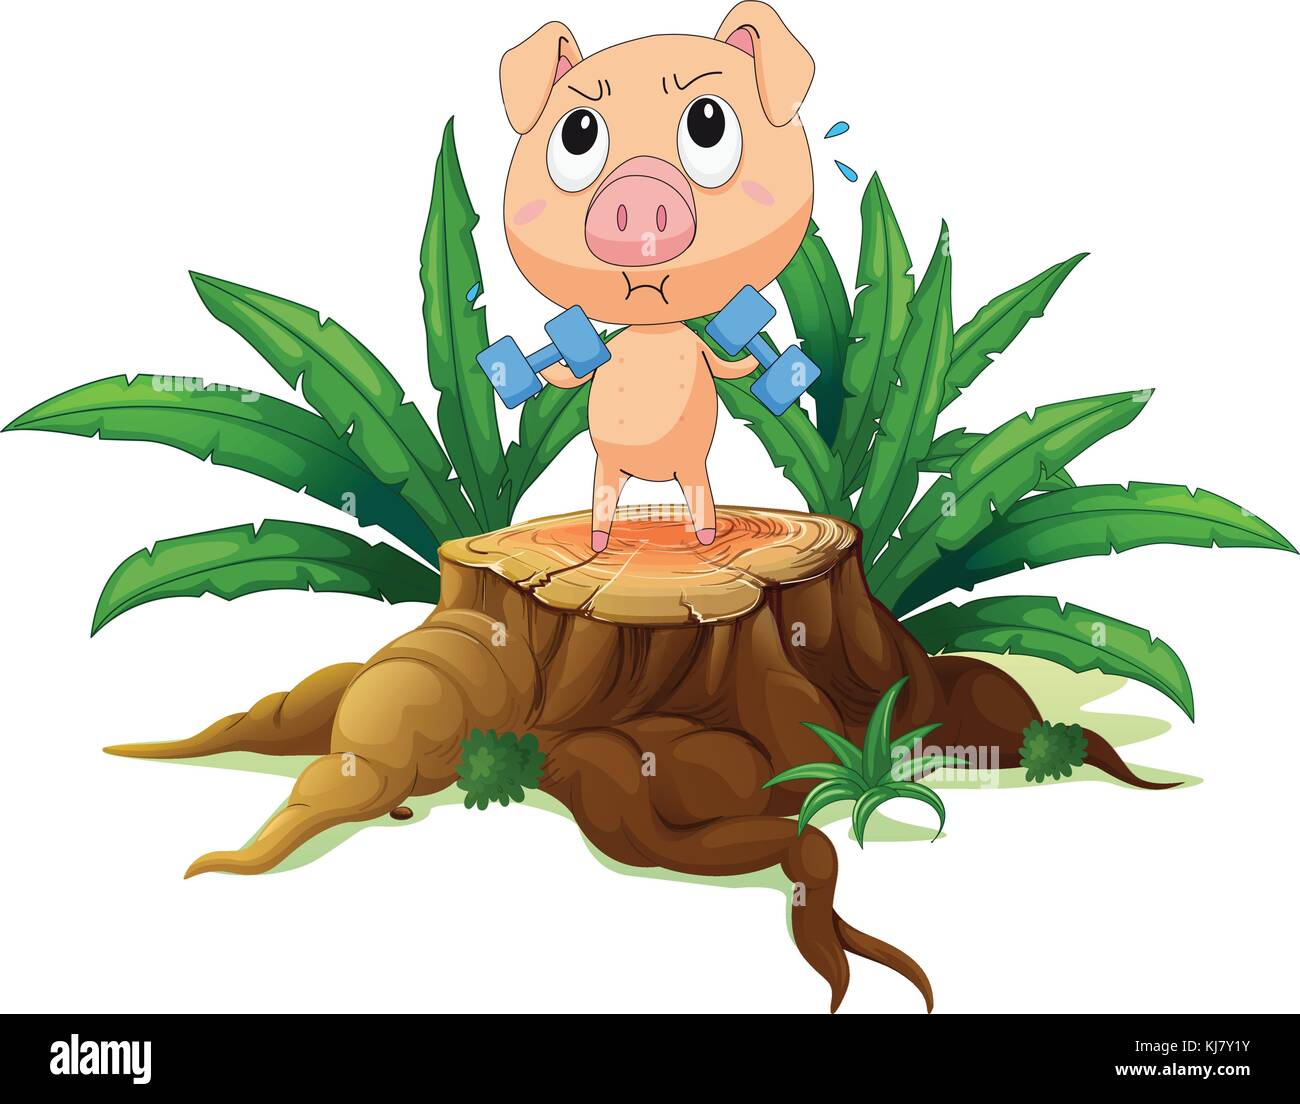 Illustration of a pig exercising above the stump on a white background Stock Vector